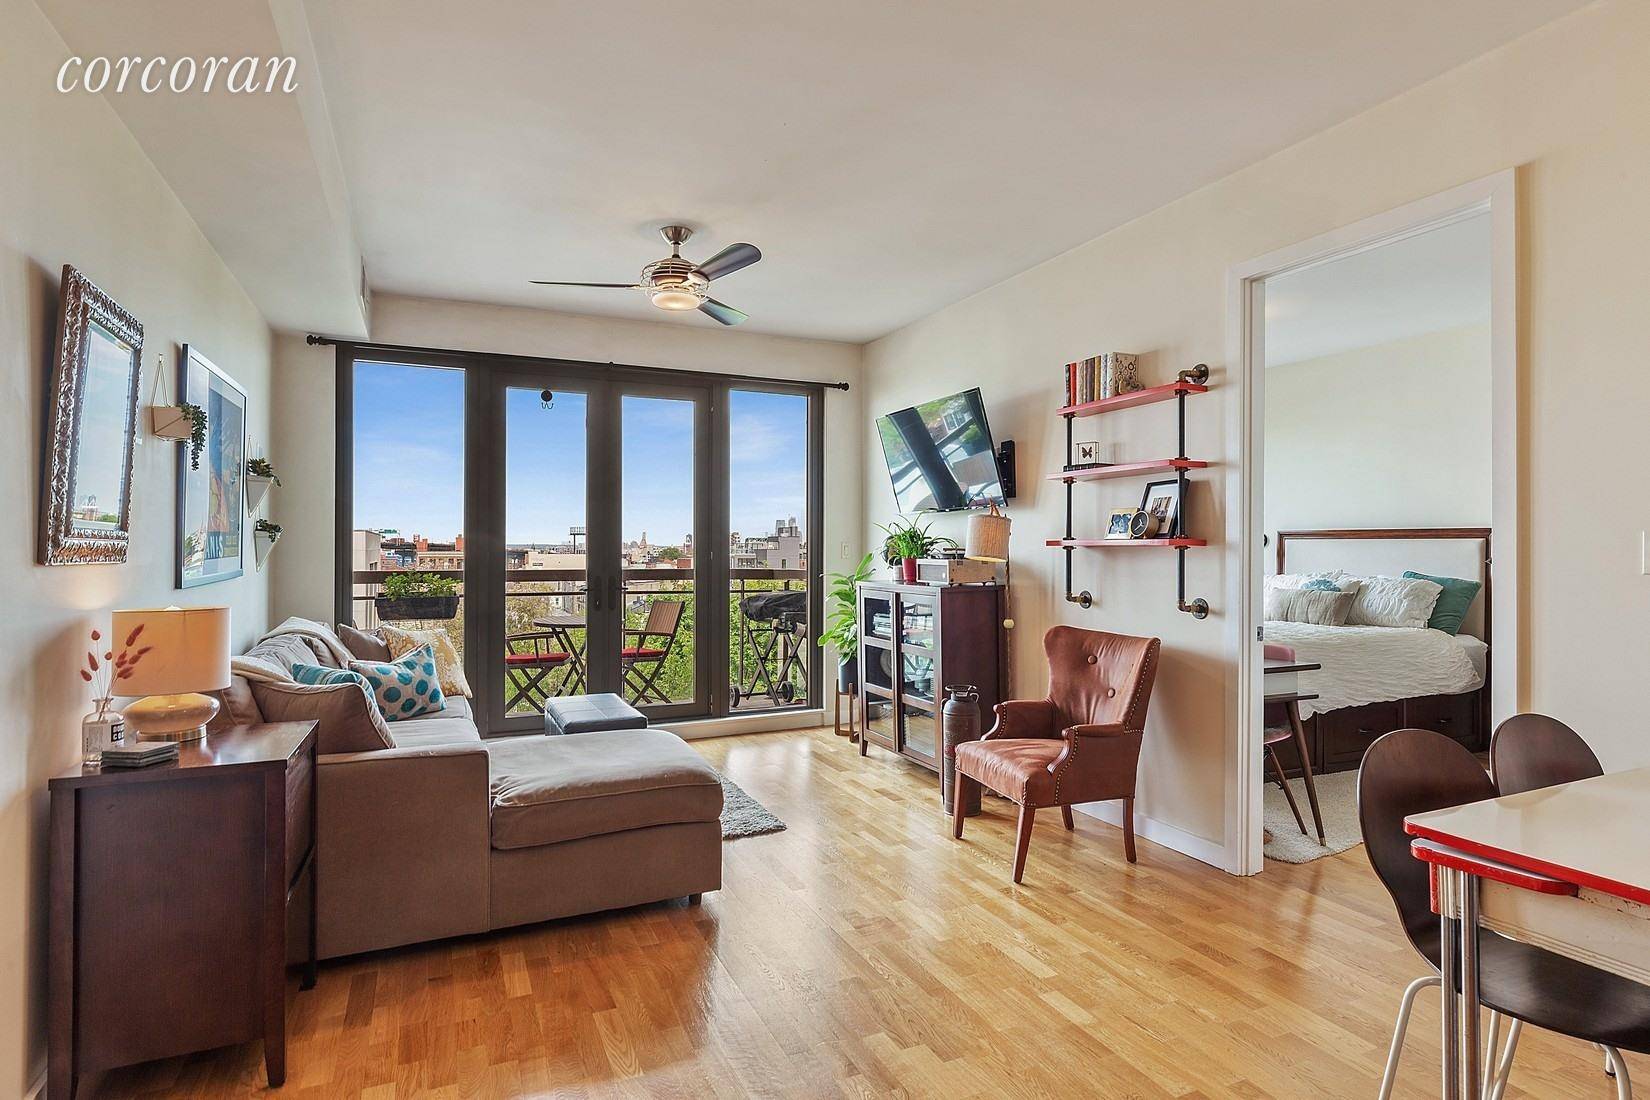 Own this incredible light filled two bedroom, two bath West facing gem for the price of renting, and get the tax benefits of being an owner.